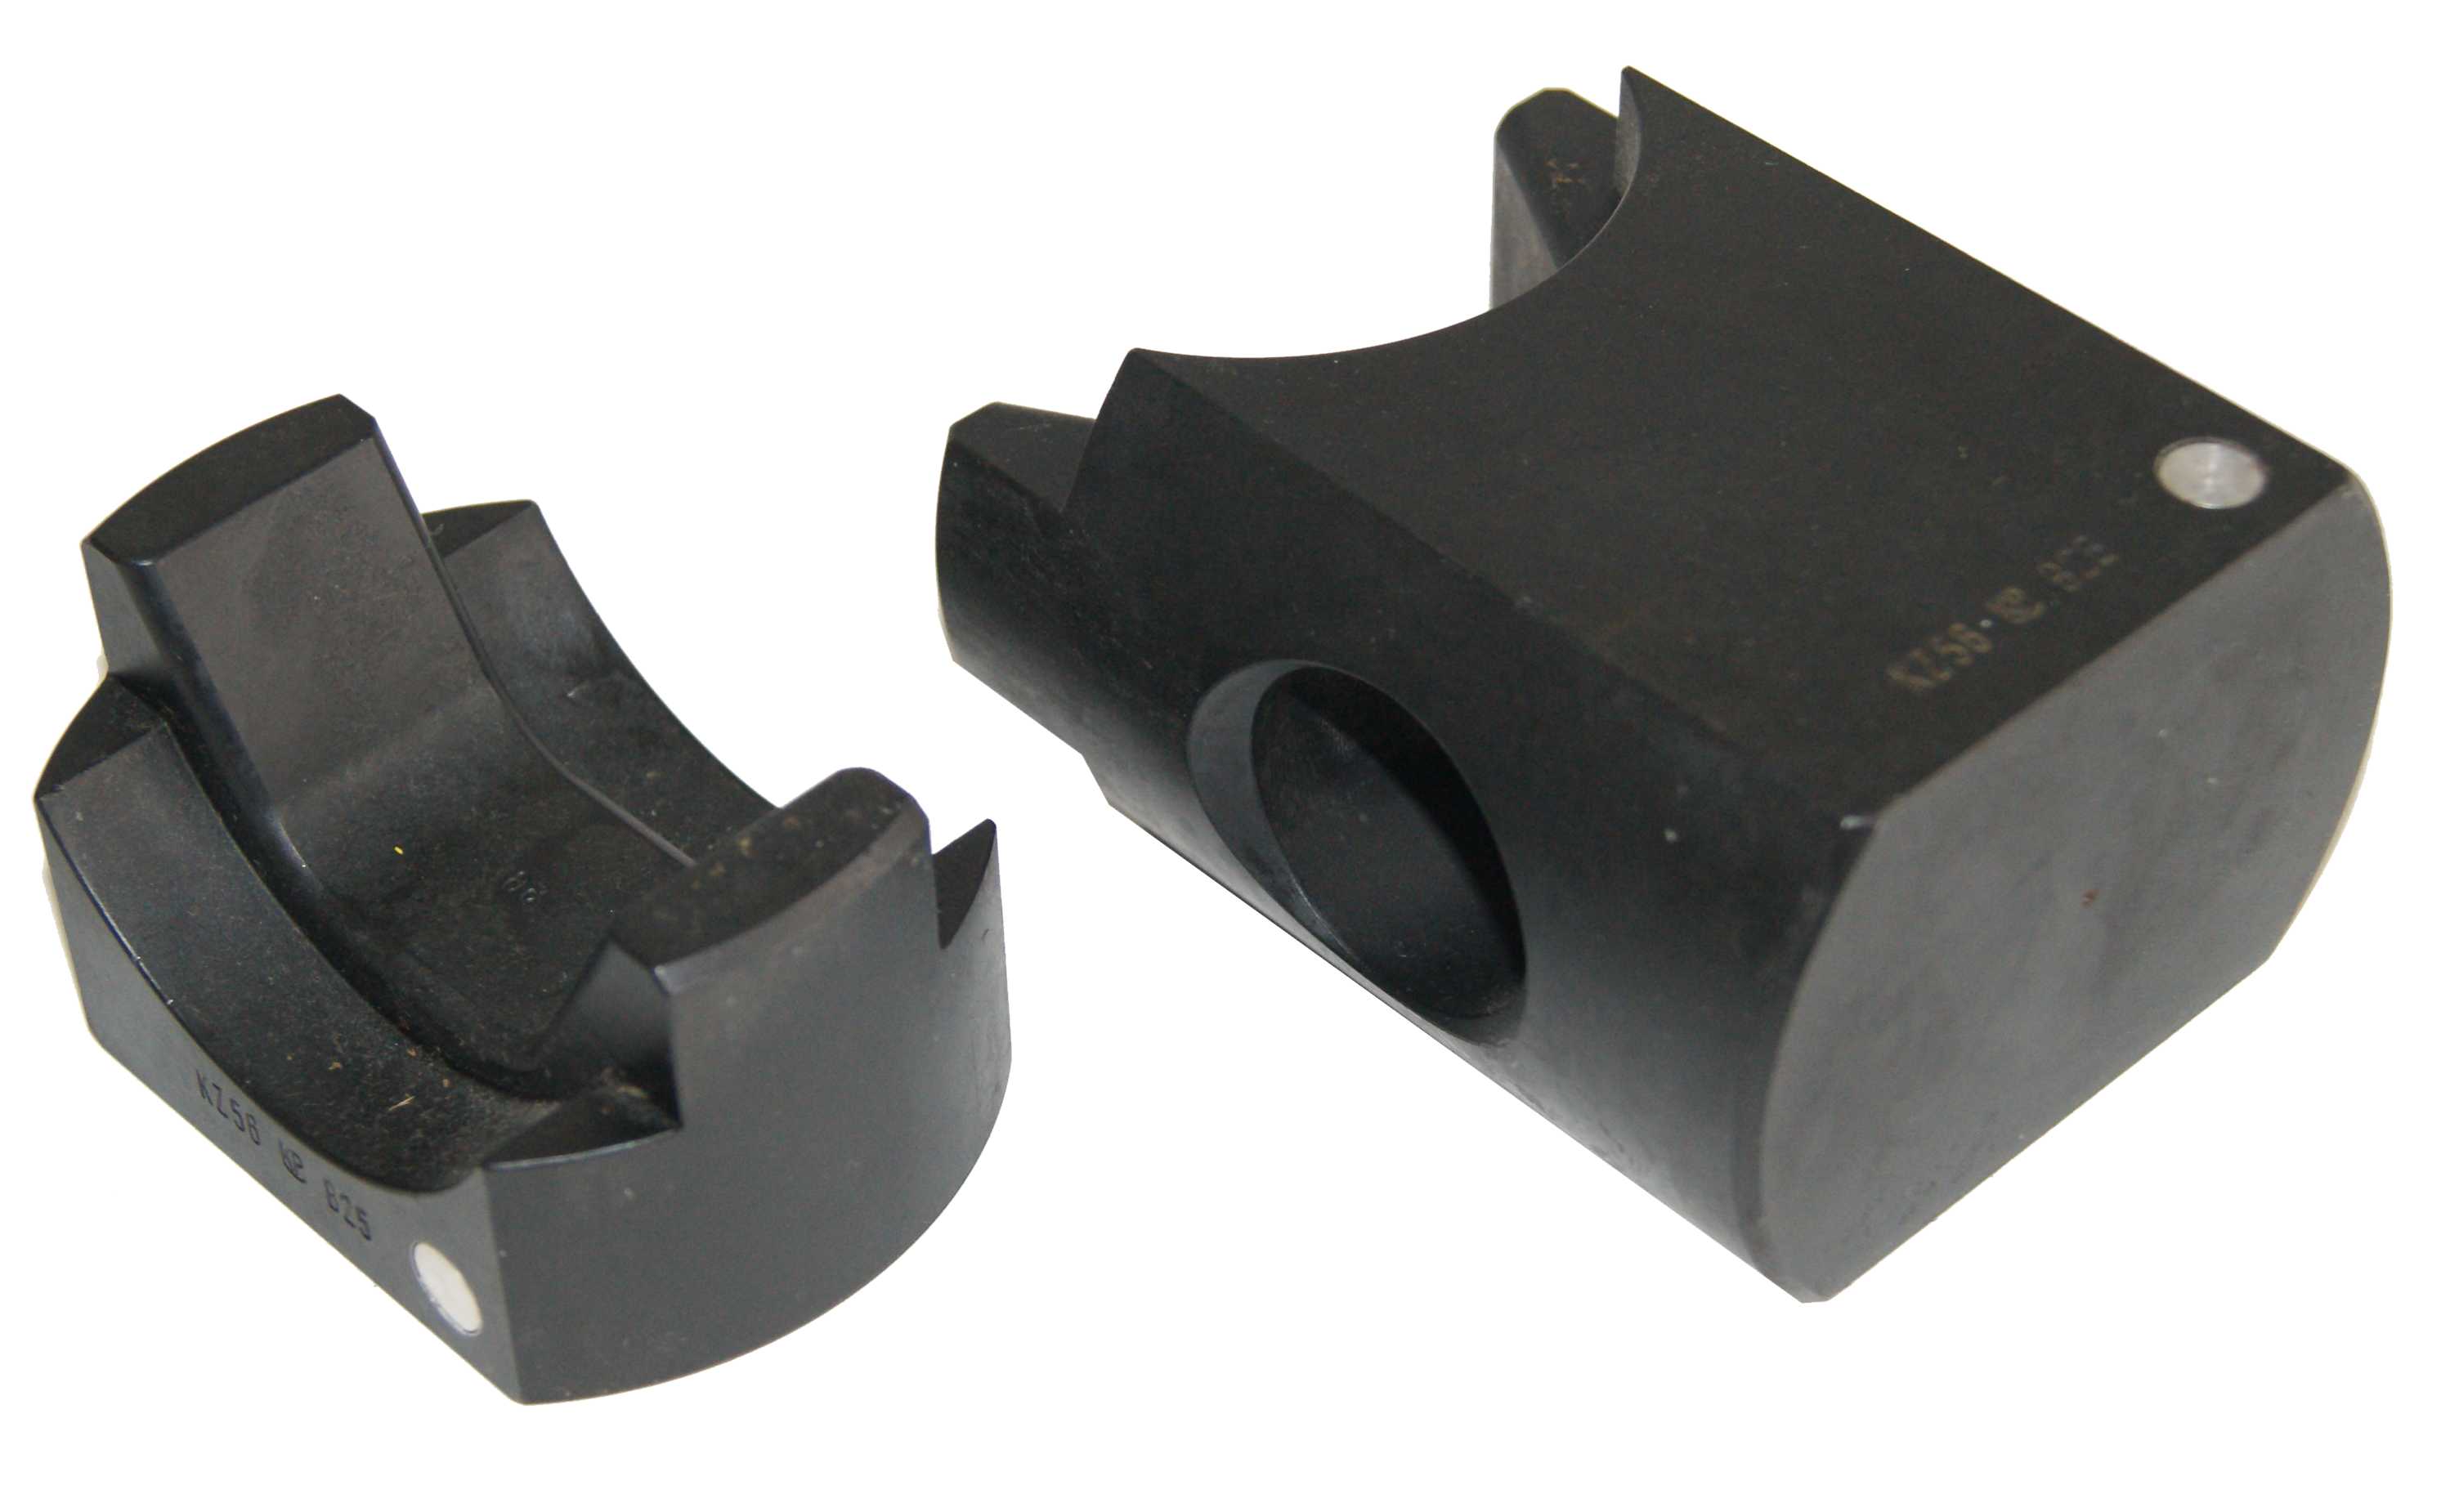 PK-D75 - Crimping insert series D75, hexagon to DIN48083-45H for compression cable lugs and connectors to DIN46235/46267